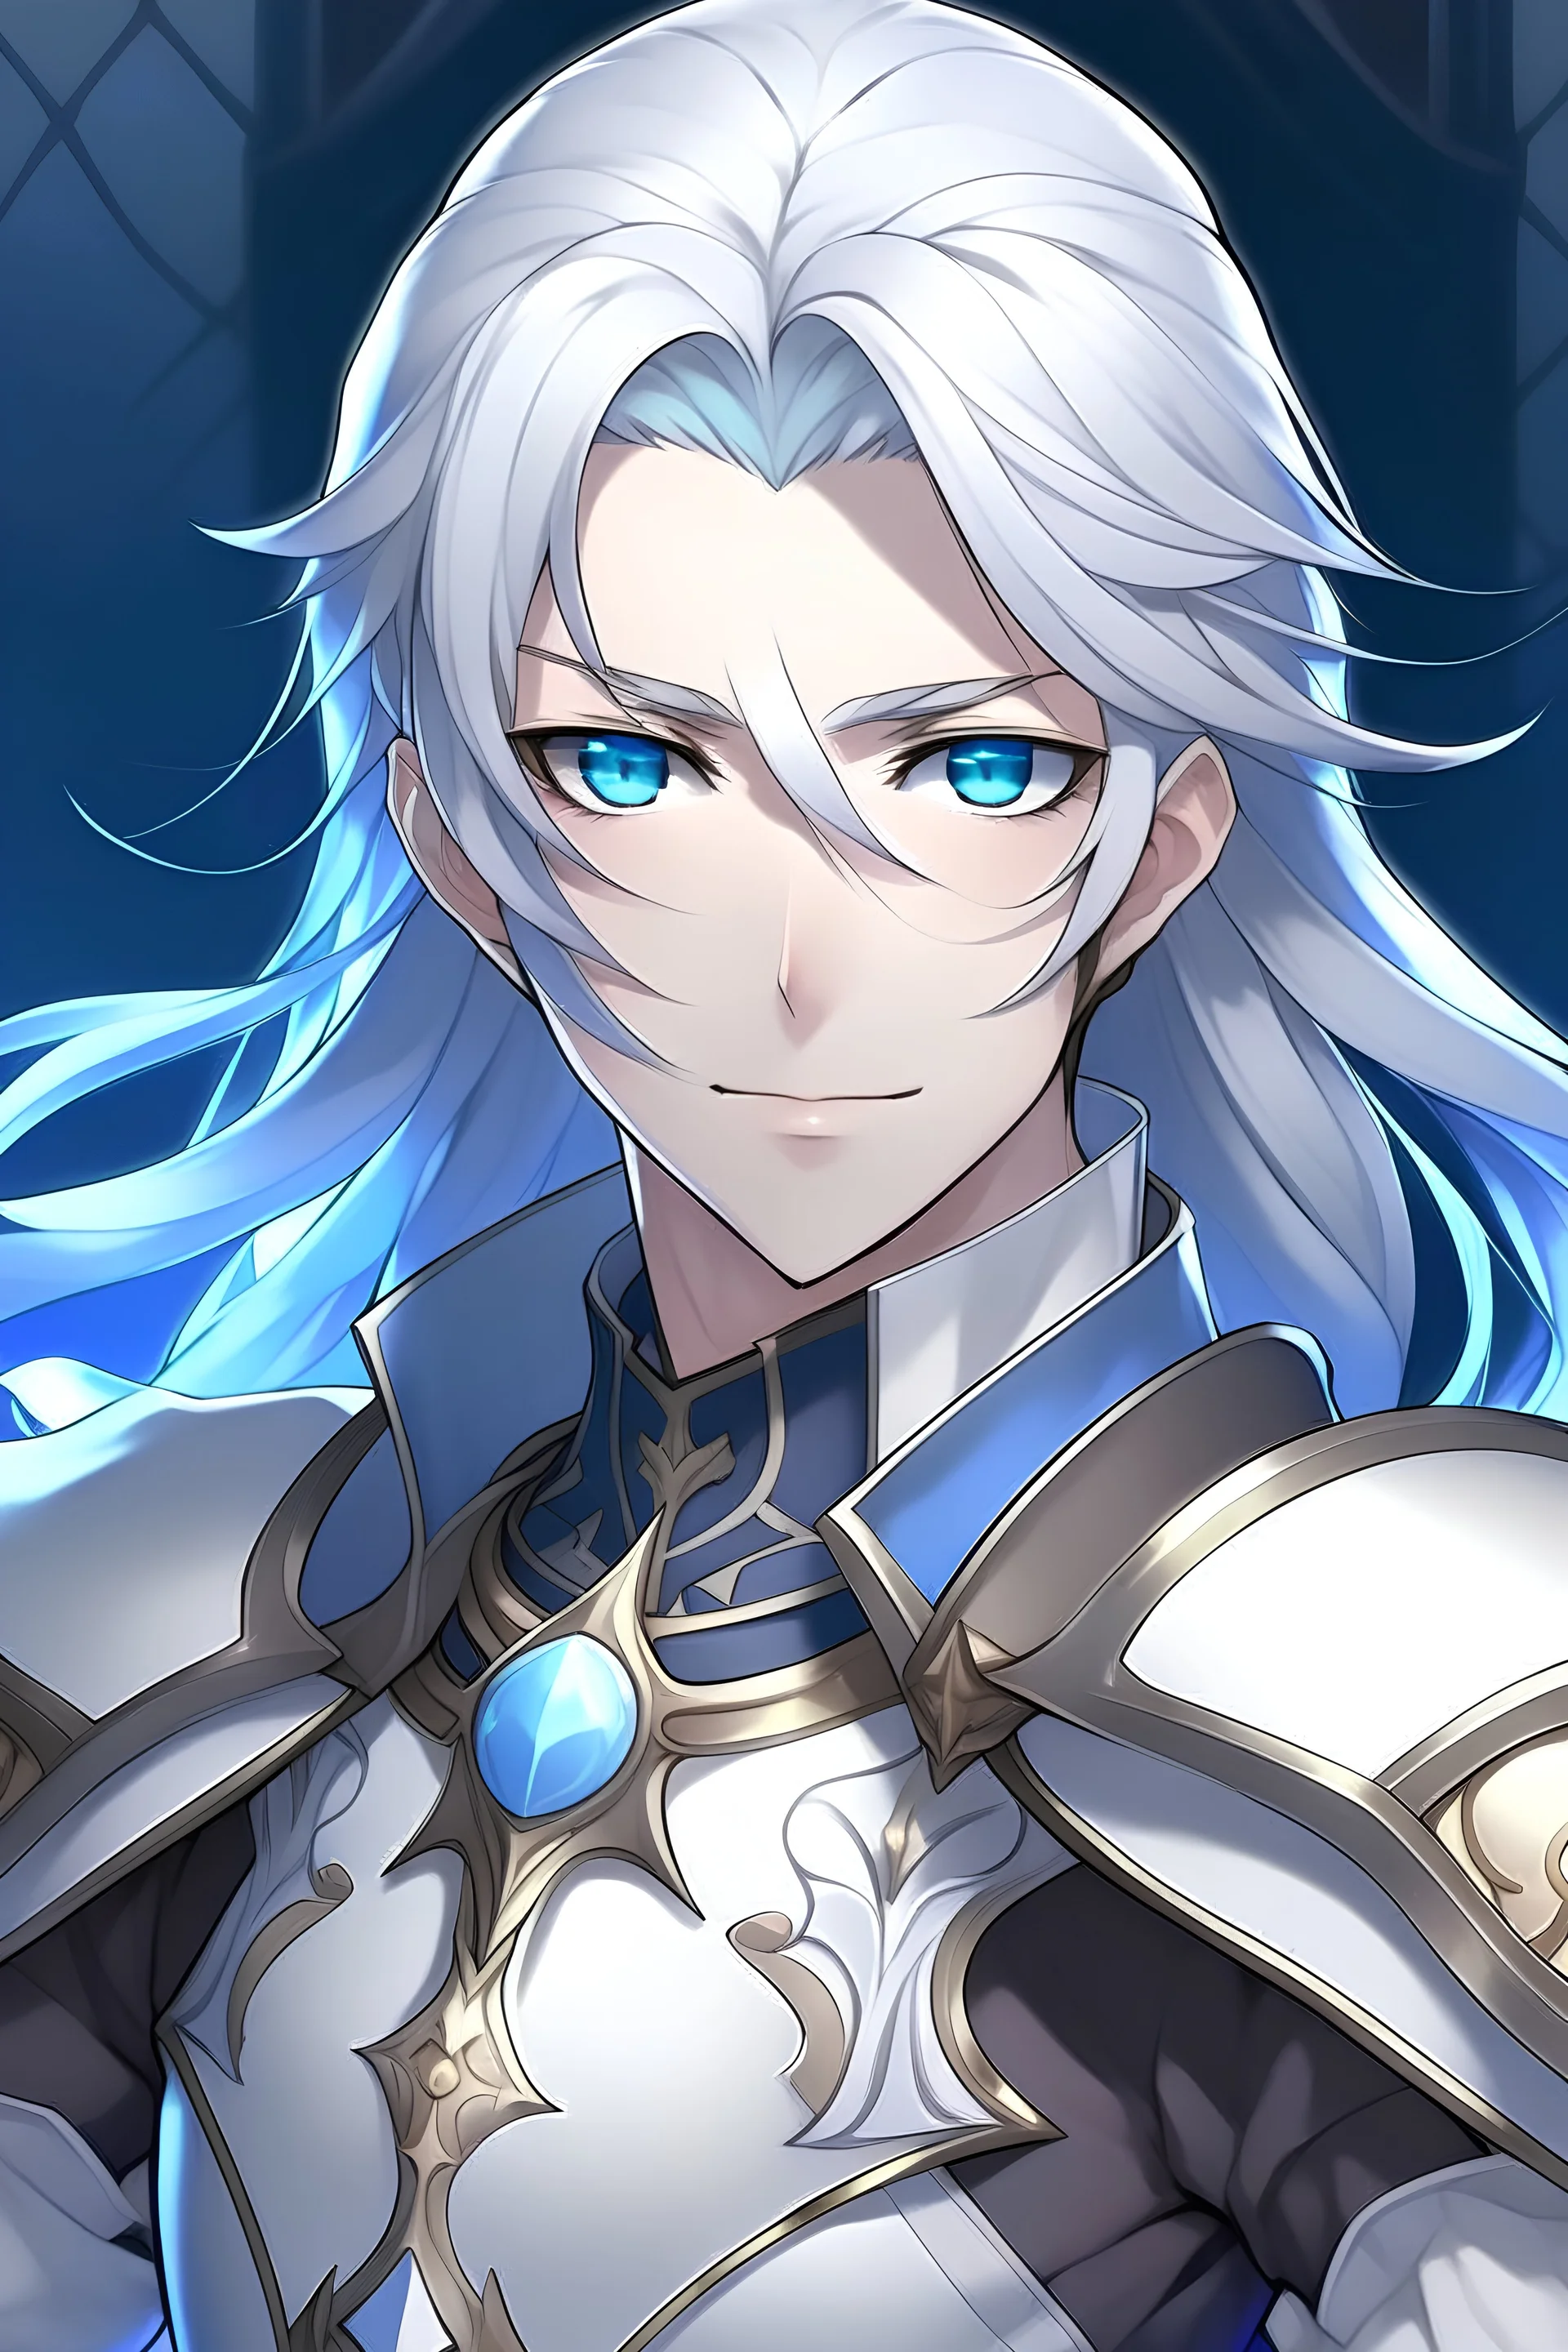 white hair blued eyed handsome young male anime character name Jin Hitoshi who has long flowing white hair, blue eyes, and knight armor